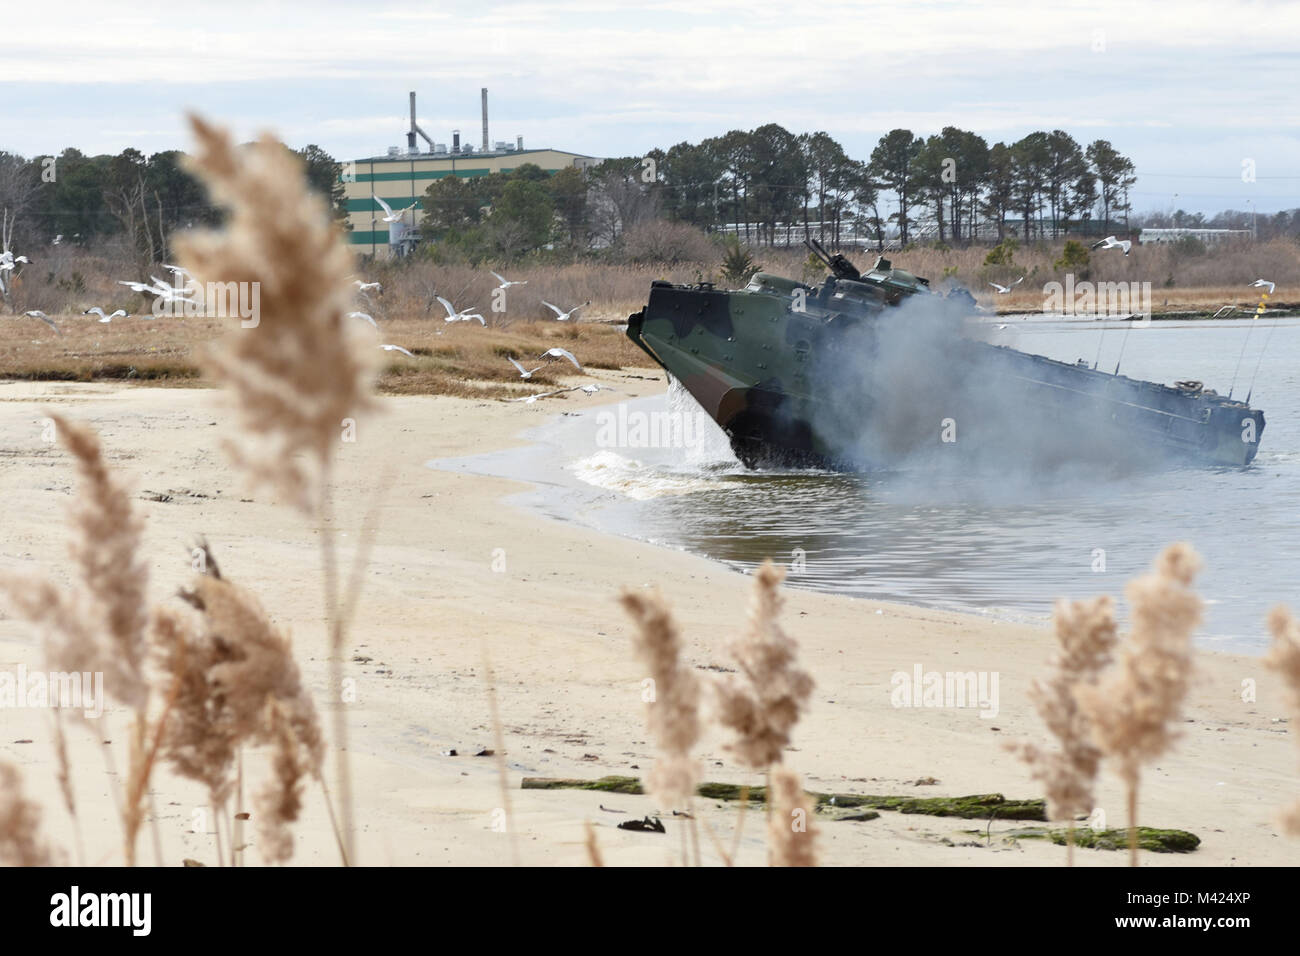 180210-N-FF140-001 NORFOLK, Va., (Feb. 10, 2018) -- Marines assigned to 4th Marine Division, 1st Platoon, perform an attack-the-beach maneuver in an amphibious assault vehicle during a training exercise at Joint Expeditionary Base Little Creek. The semi-annual exercise supports the division's mission to provide trained combat support personnel to augment the active component in time of war or national emergency. (U.S. Navy photo by Mass Communication Specialist 2nd Class Jacob D. Galito/Released) Stock Photo